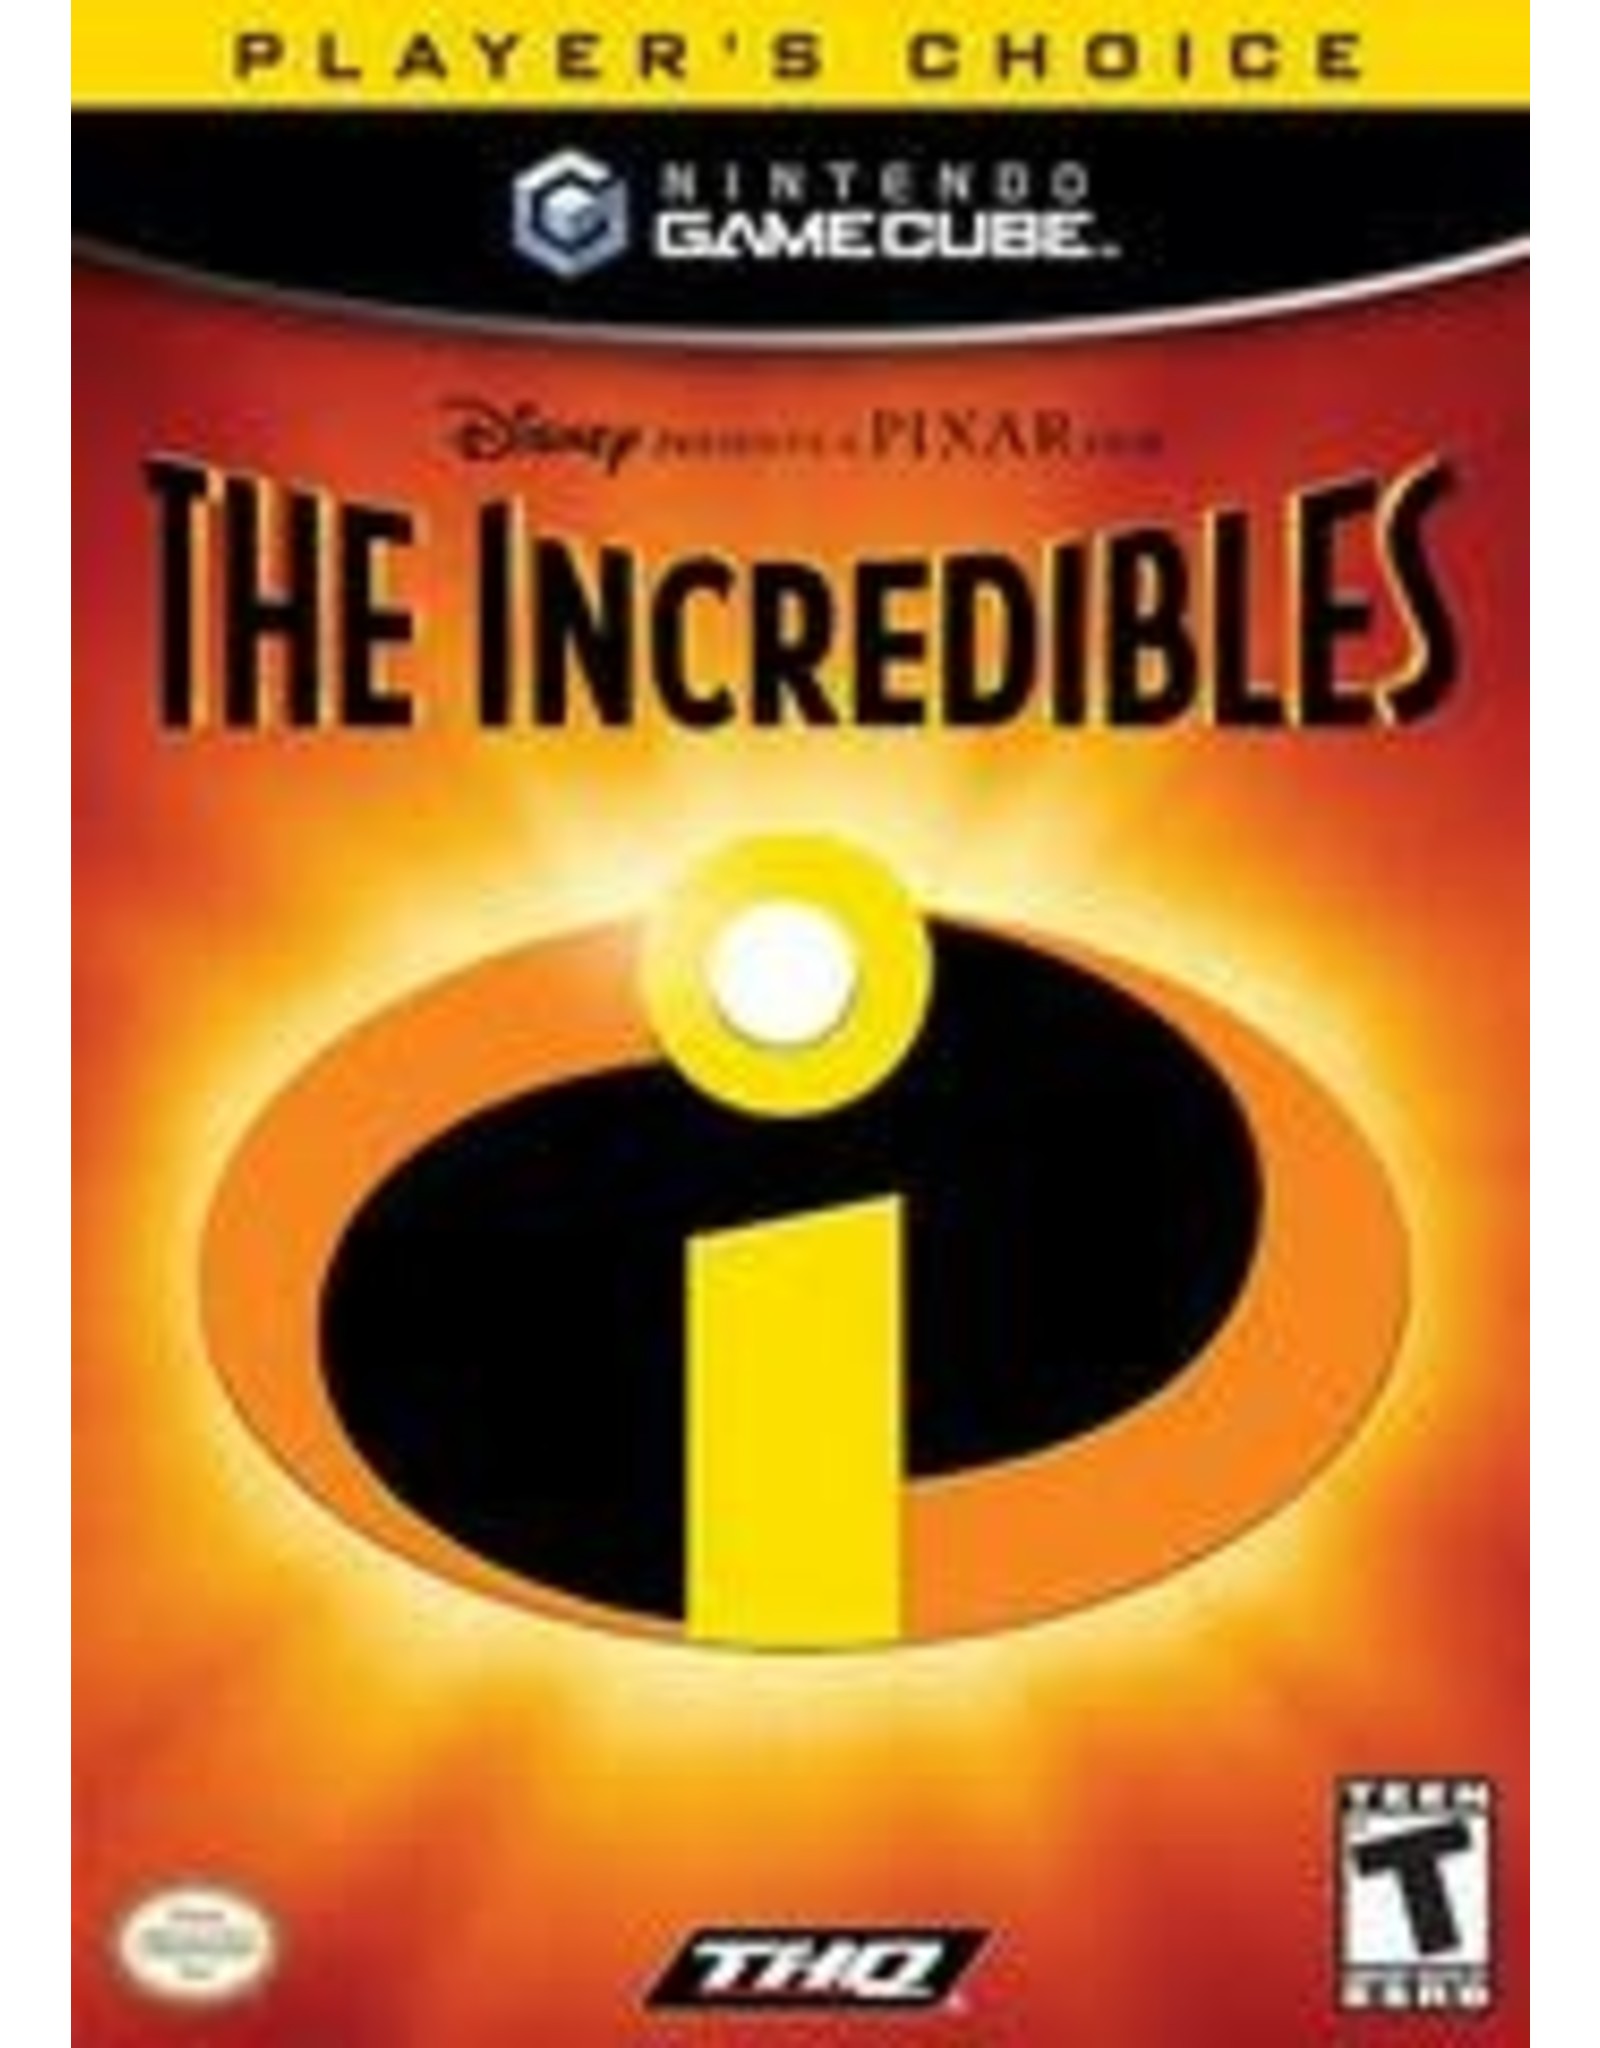 Gamecube Incredibles, The (Player's Choice, CiB)